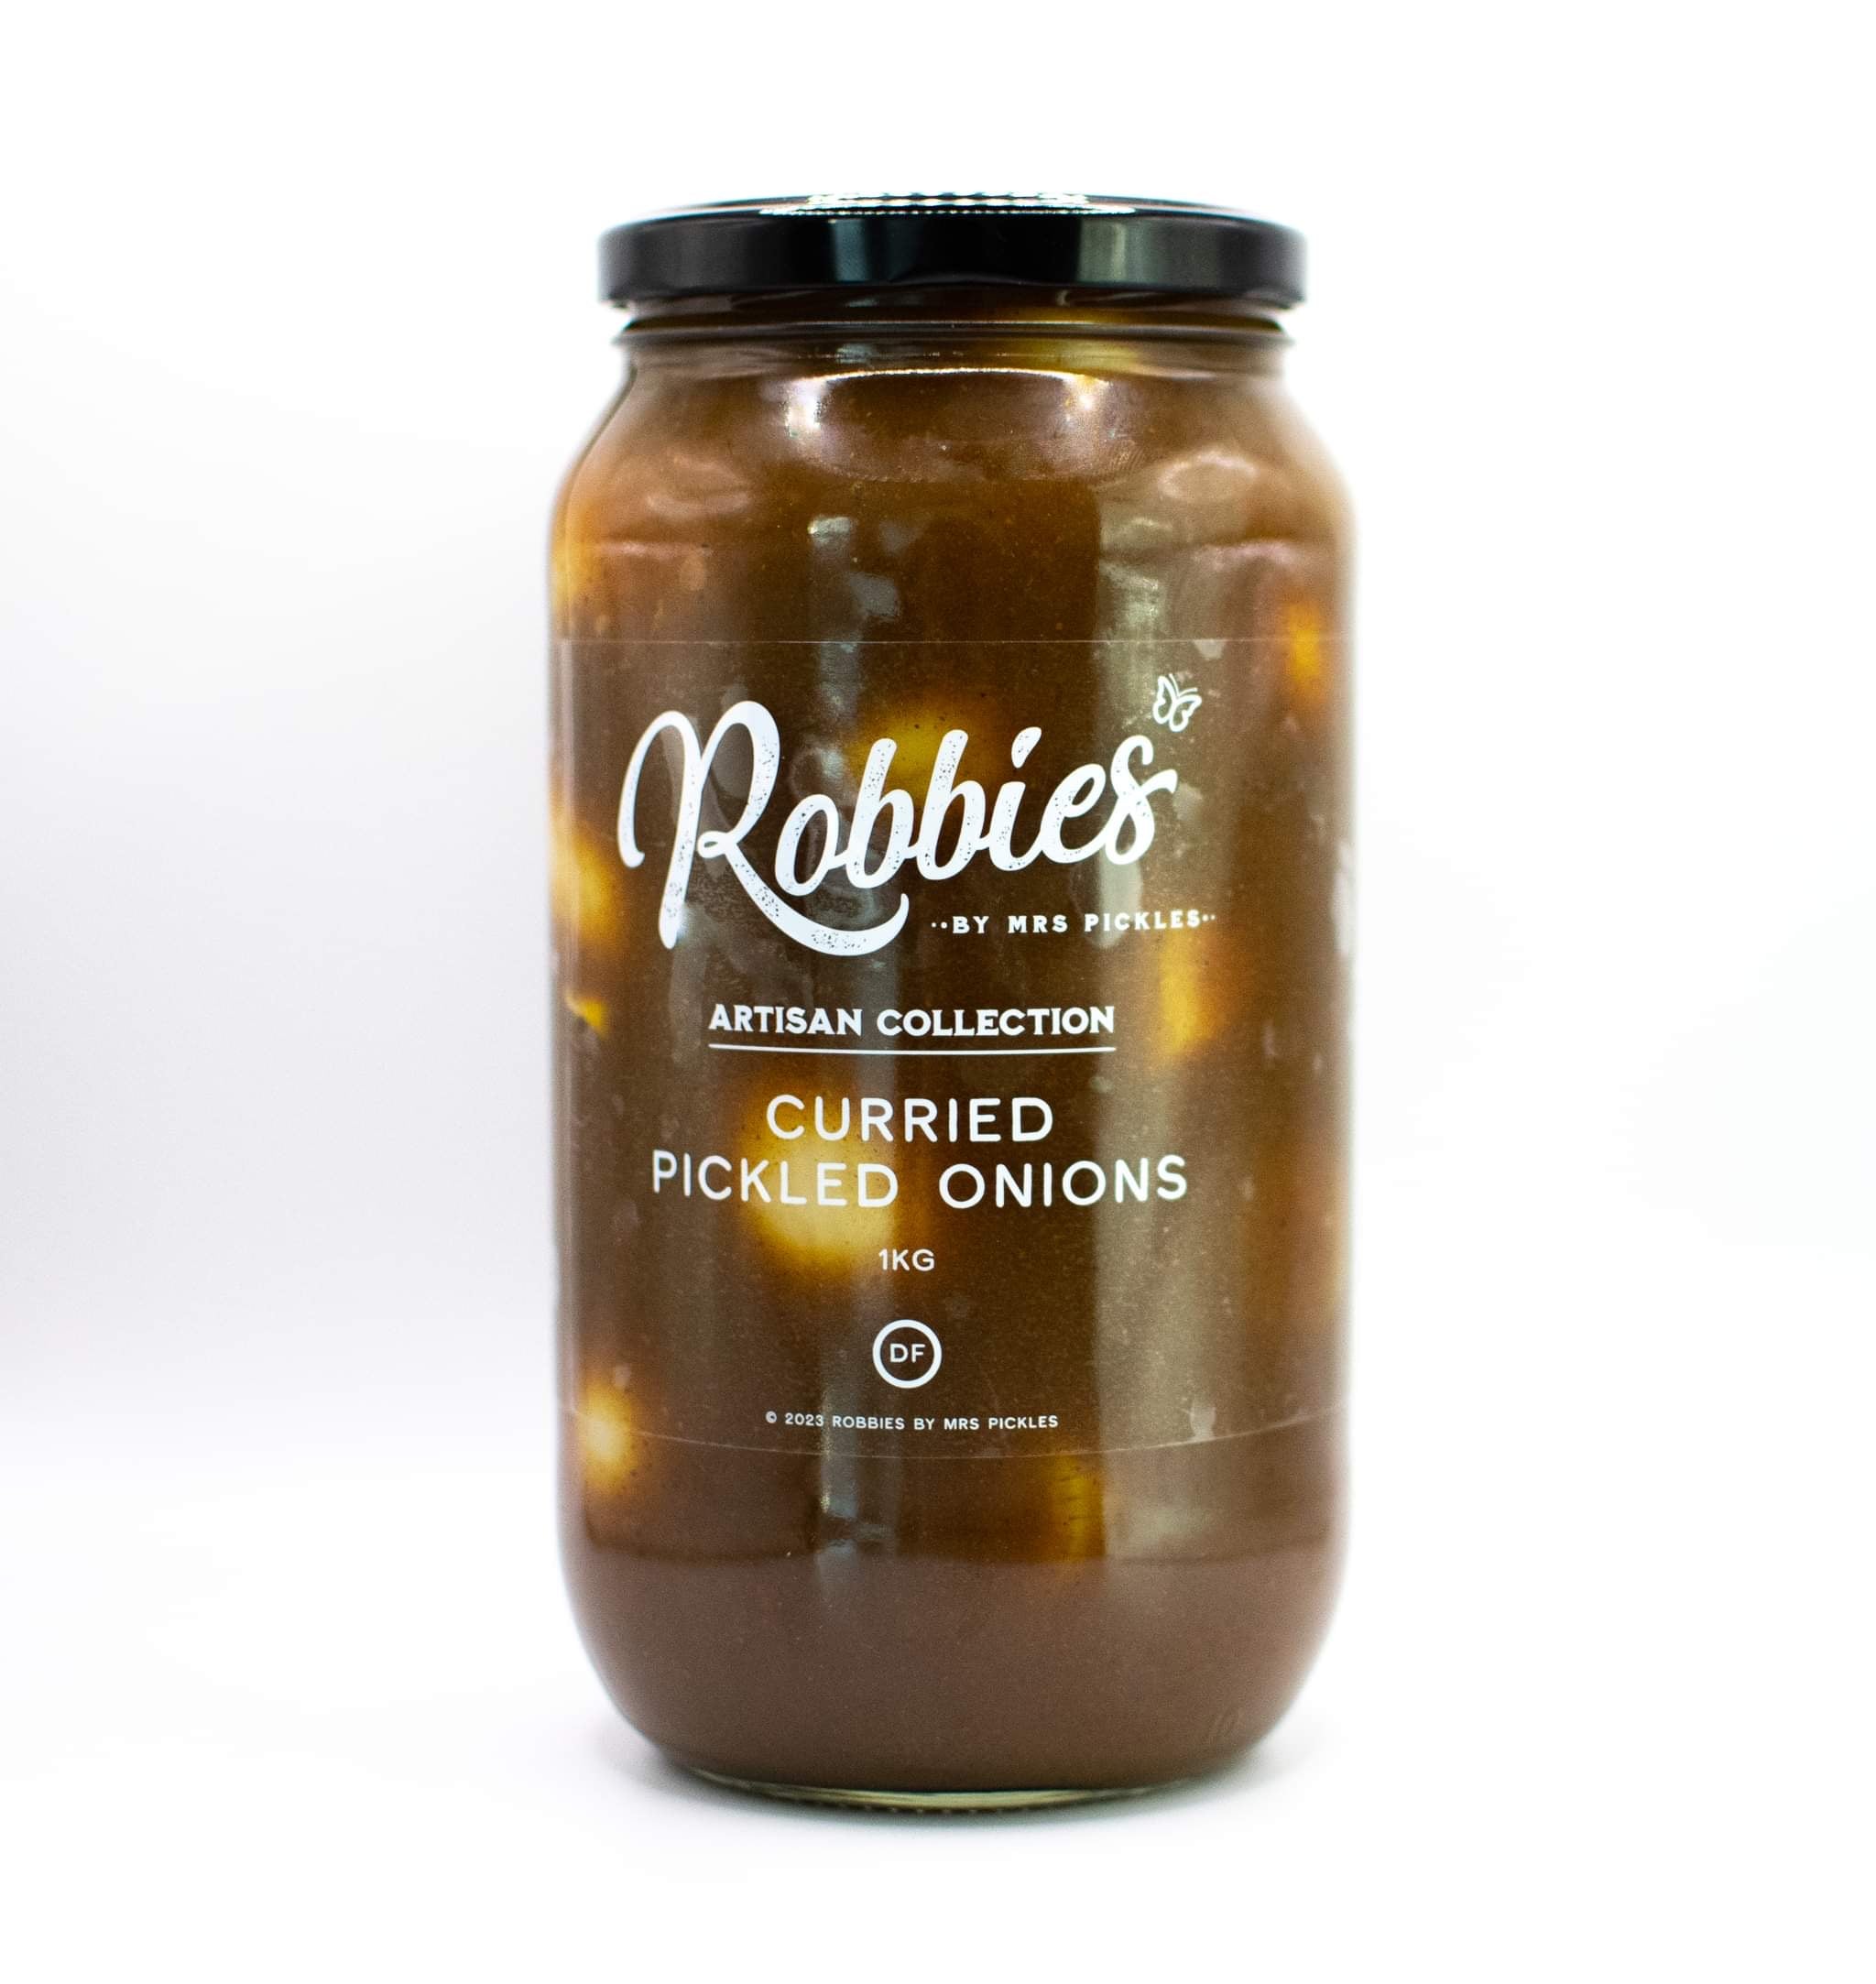 Curried Pickled Onions 1 KG